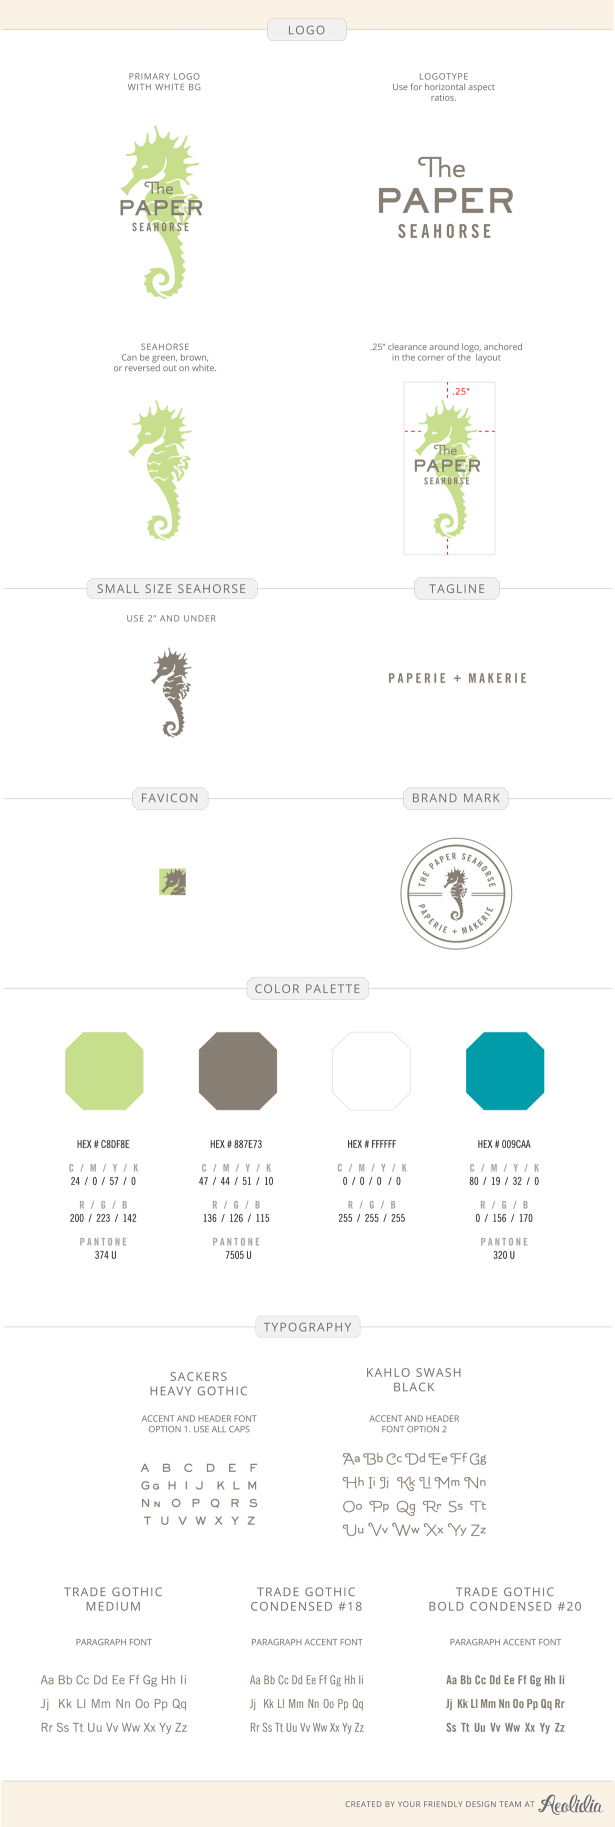 Paper Seahorse identity - begin with your brand